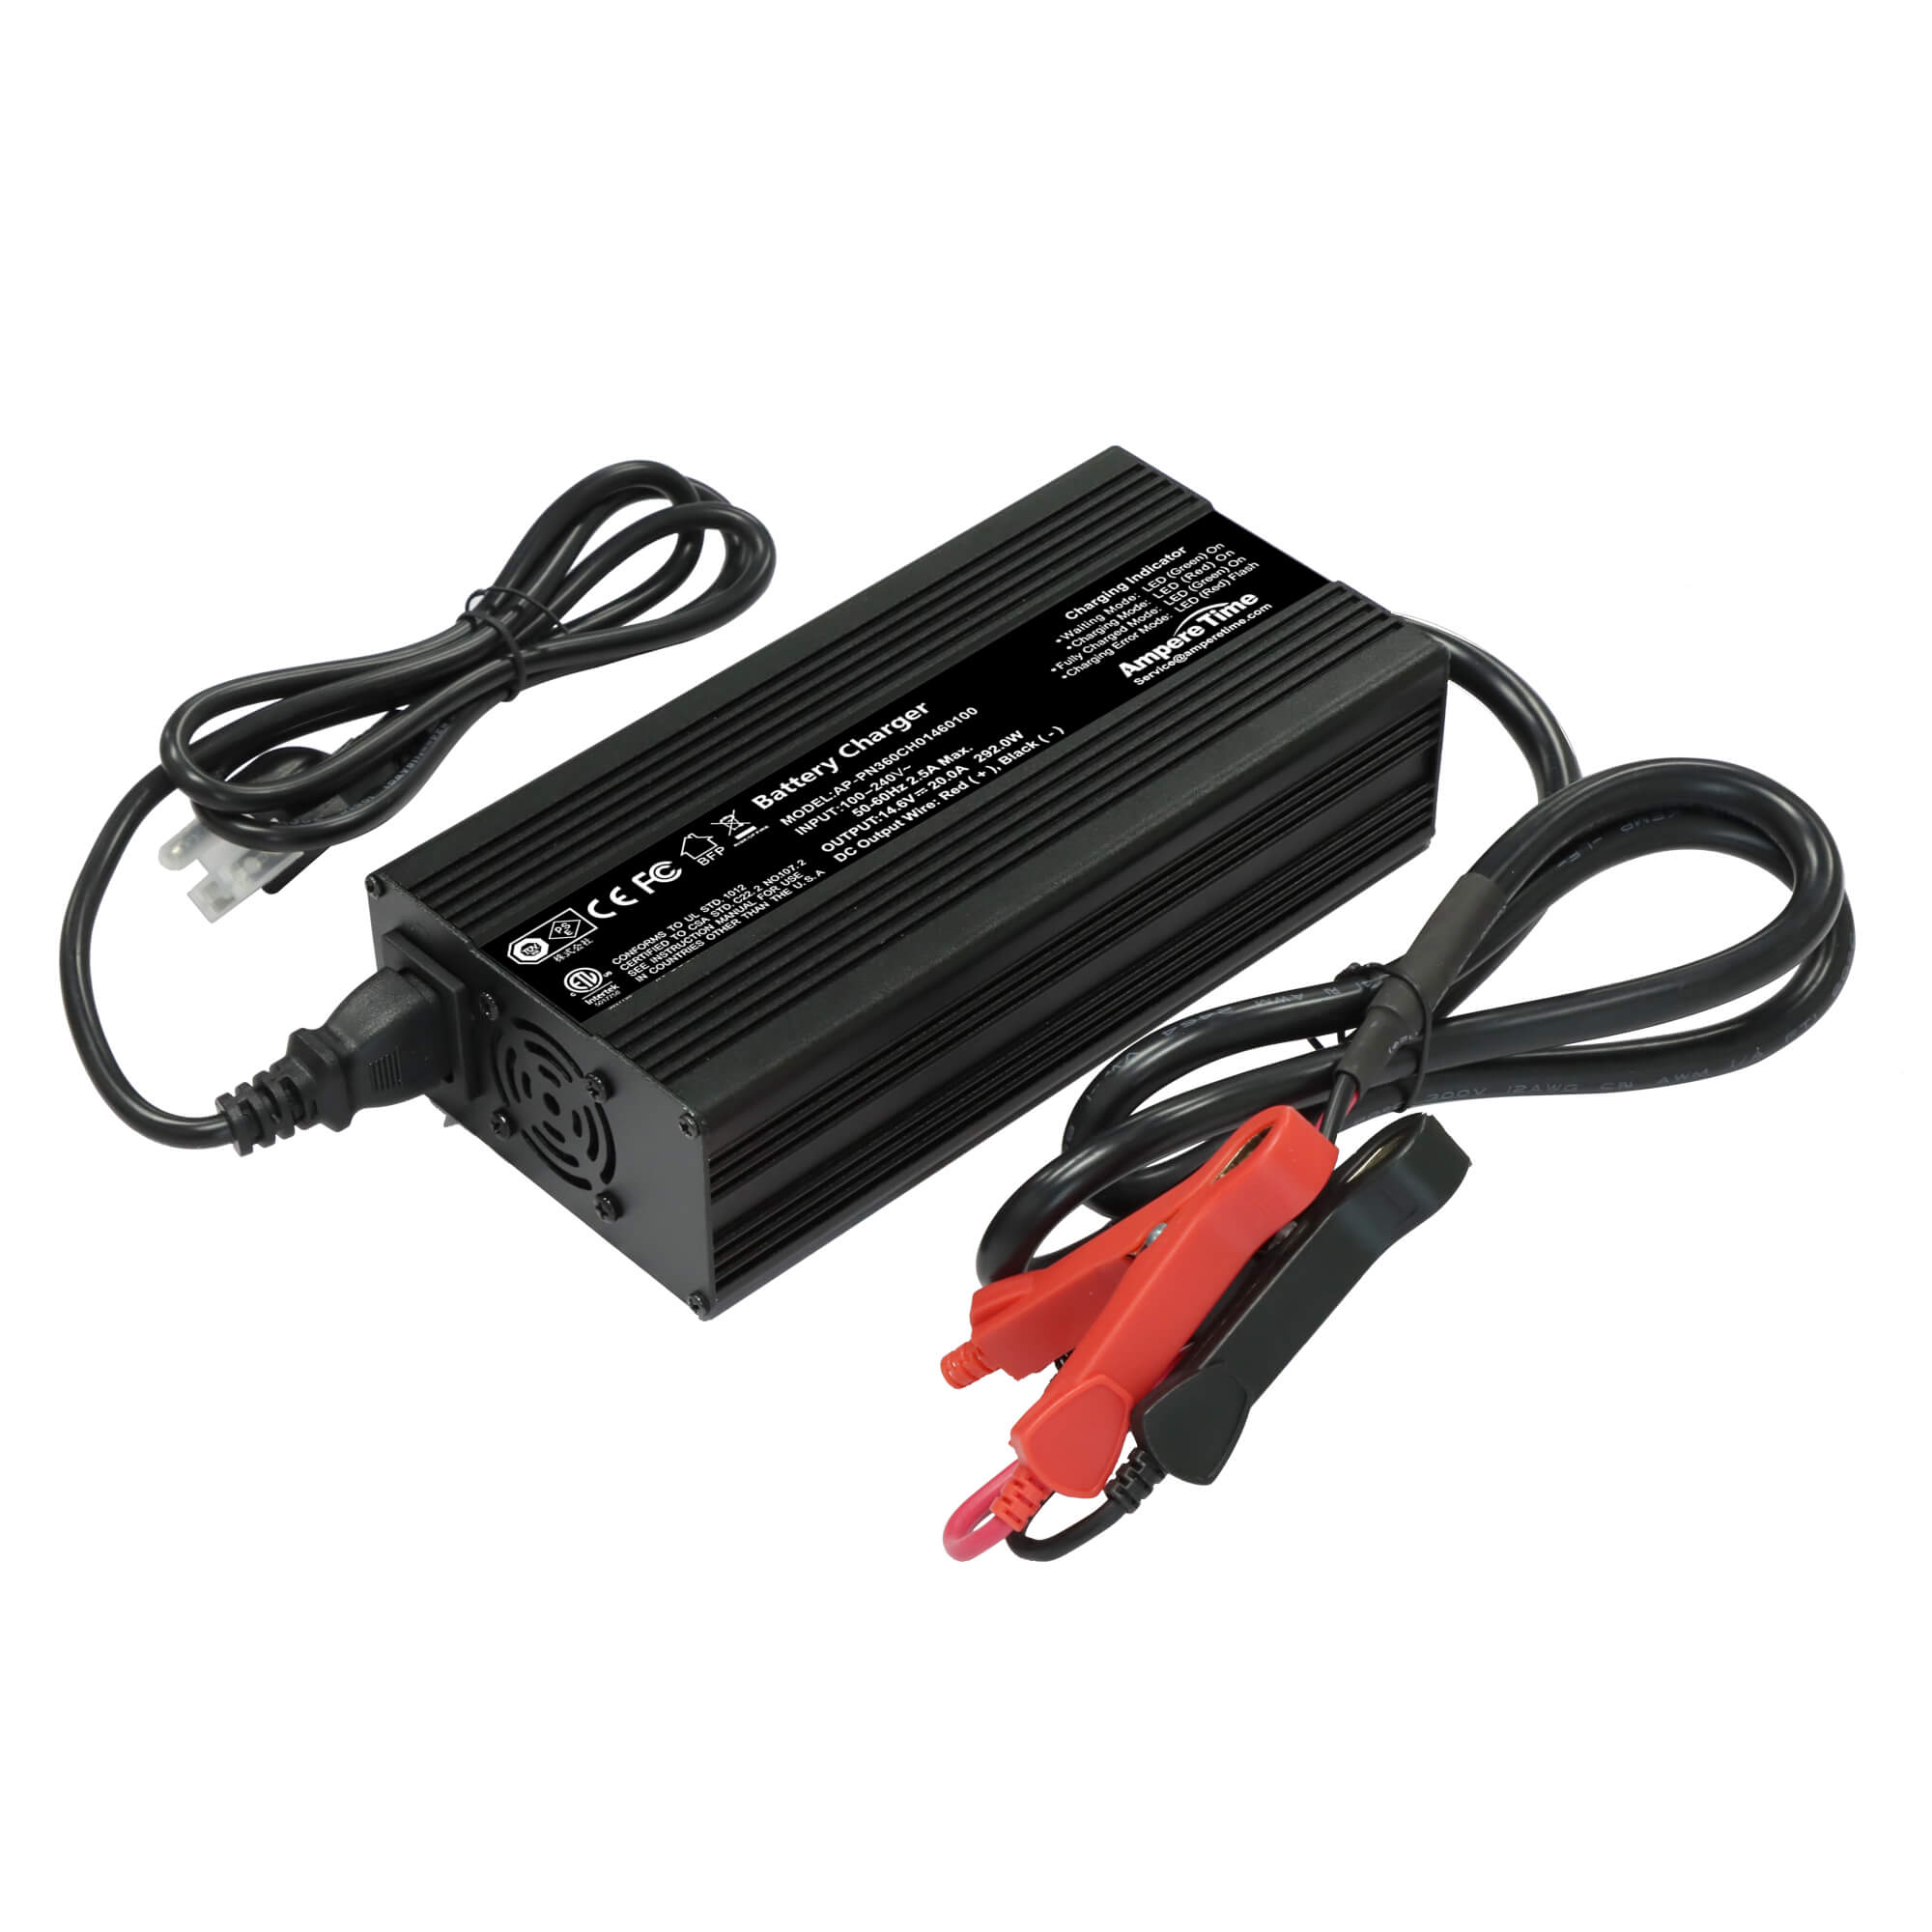 Ampere Time 14.6V 20A Dedicated LiFePO4 Battery Charger